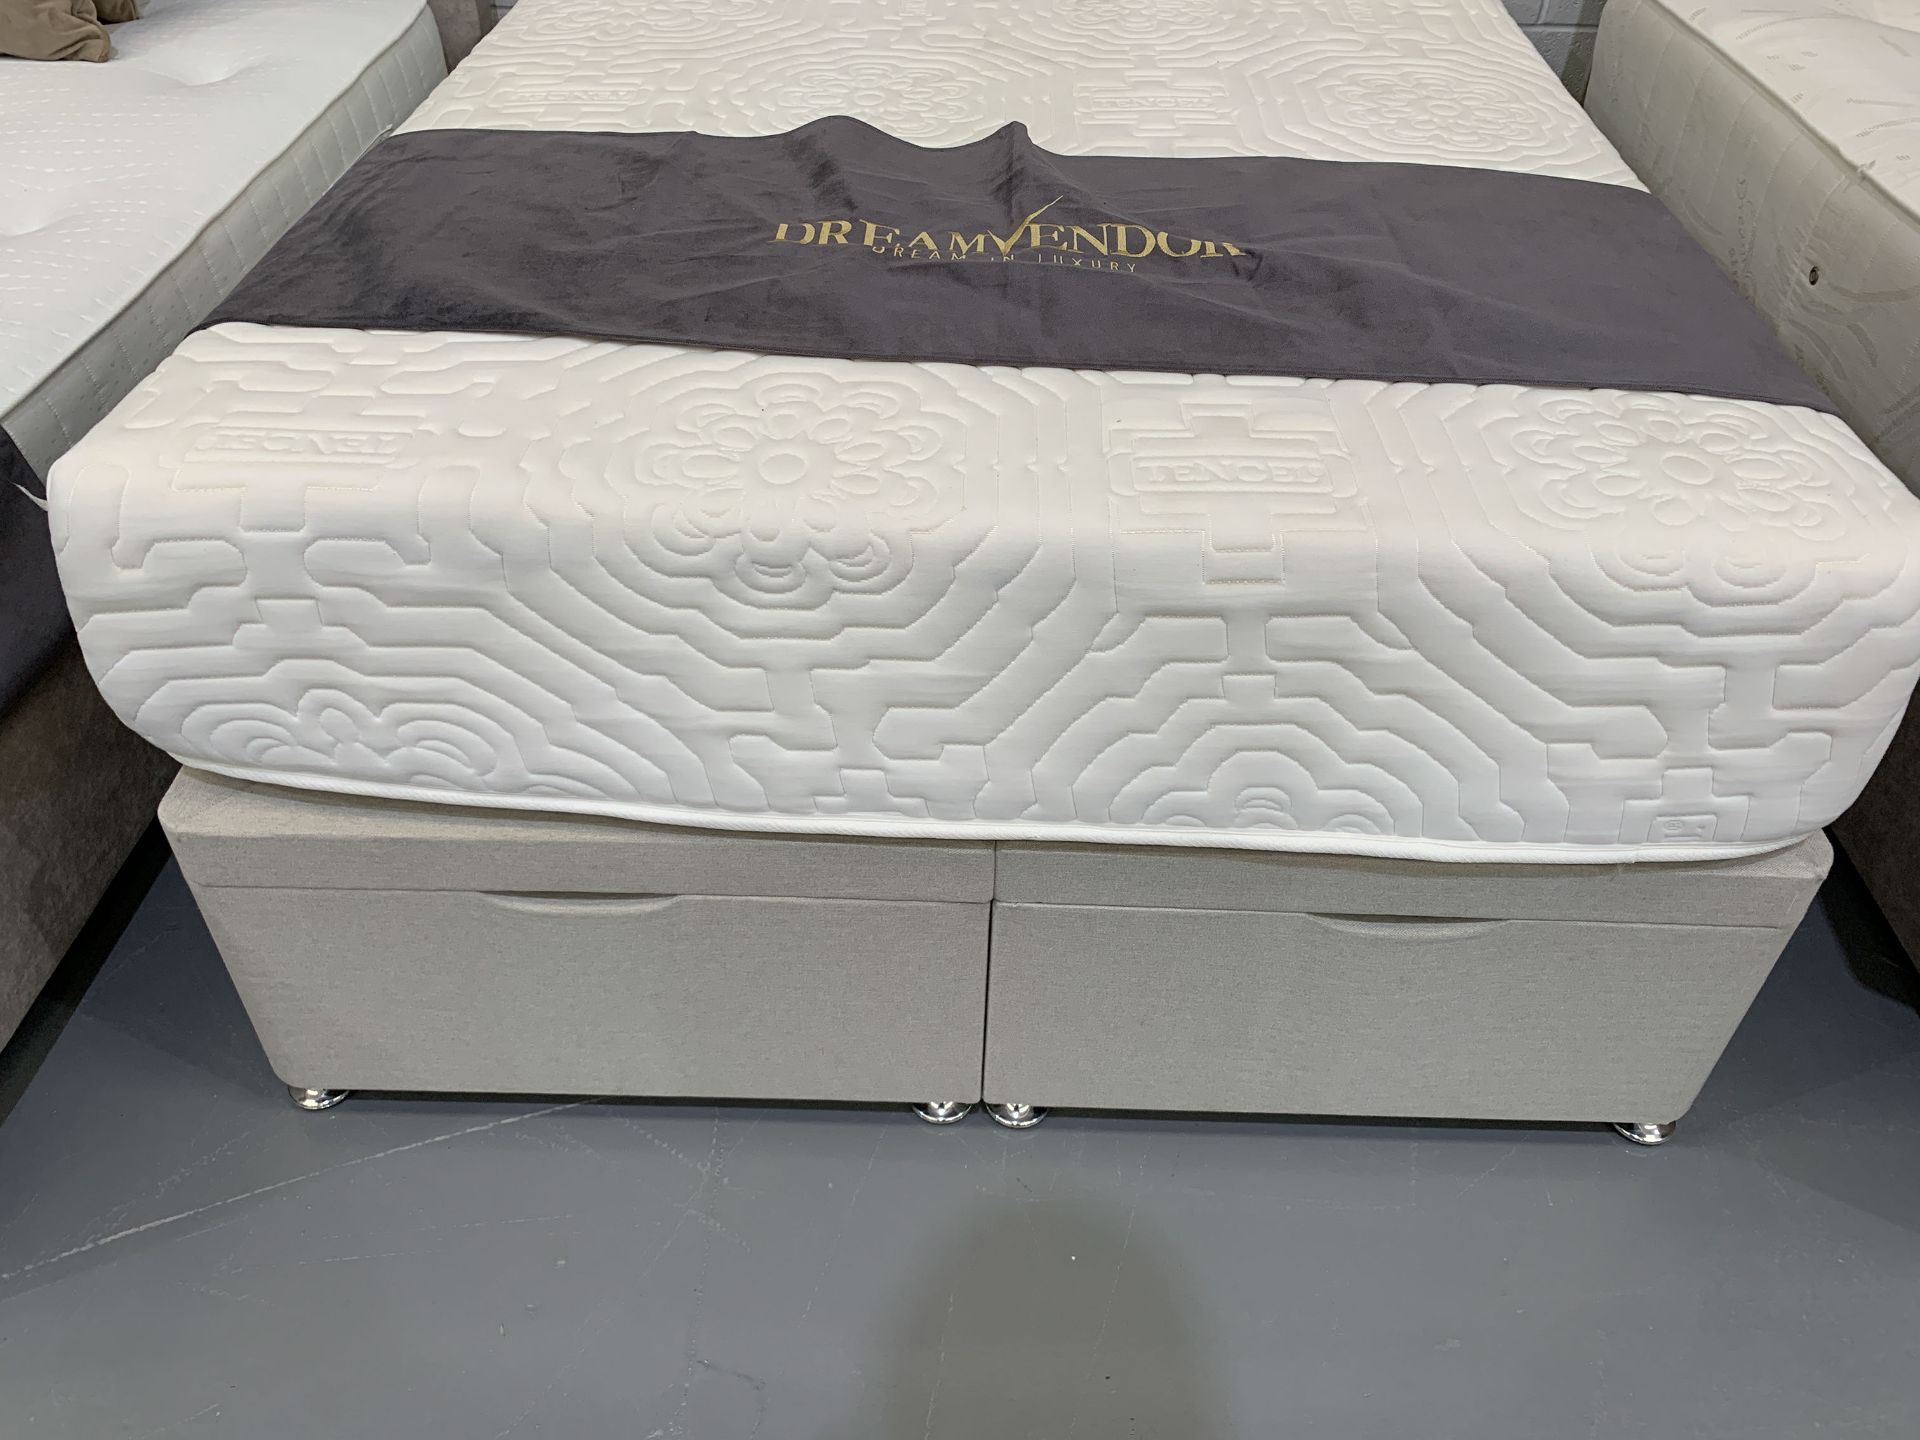 Dreamvendor Double Ottoman Bed with Tencel Mattress - Image 4 of 6